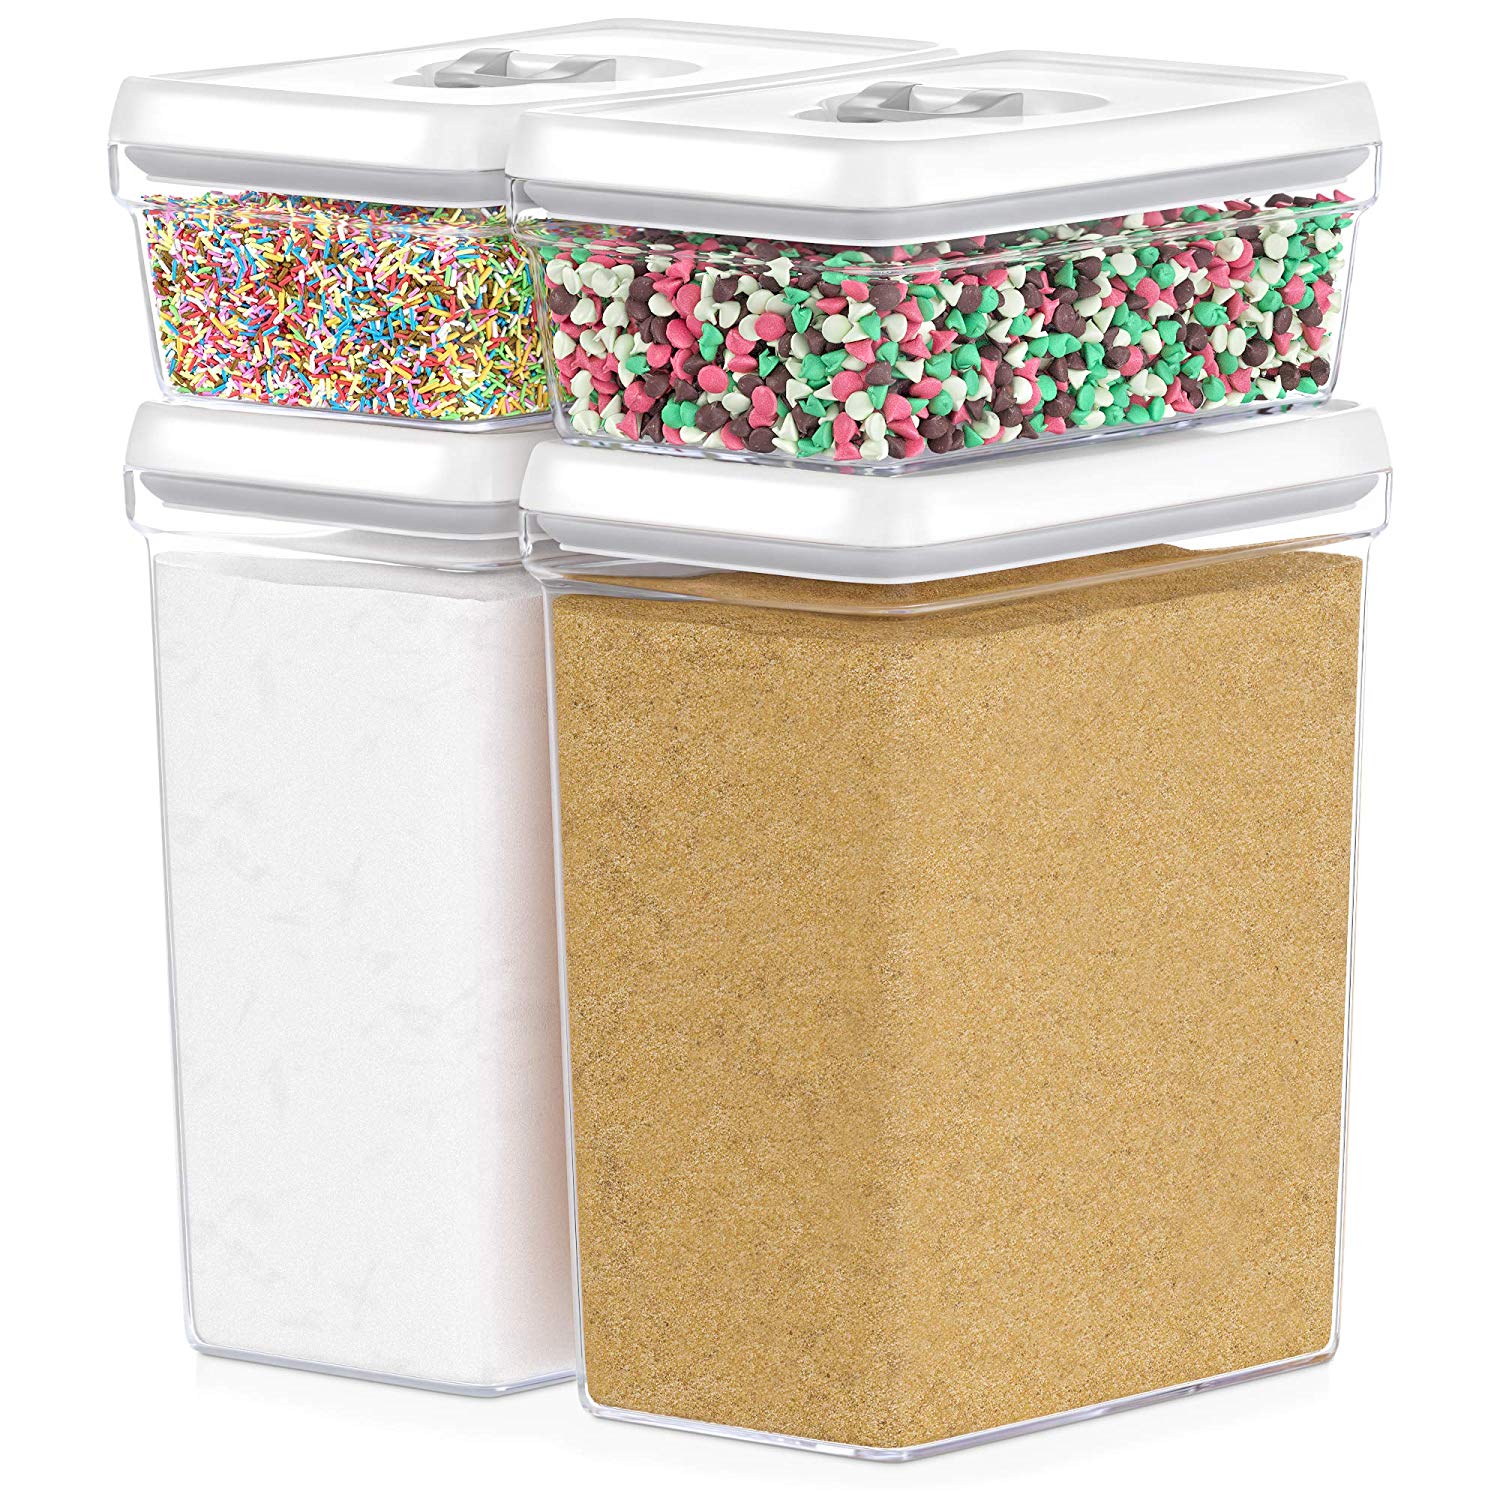 Airtight Storage Containers Flour - Airtight Food Storage Container